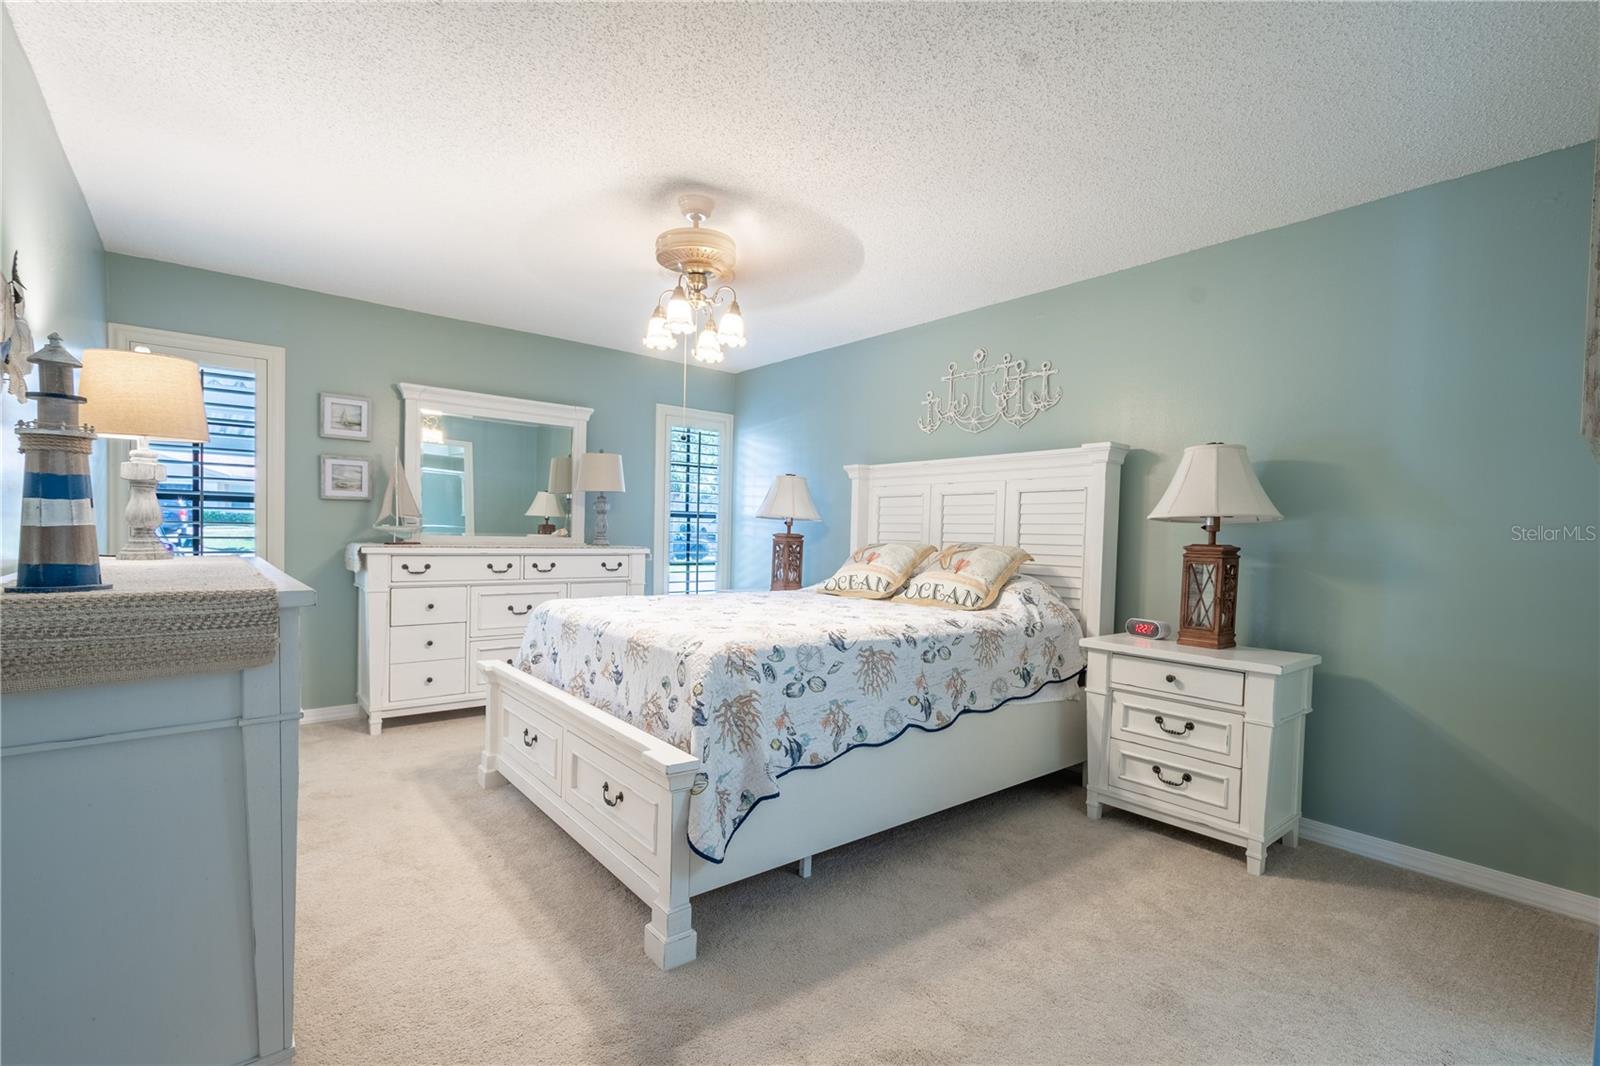 The freshly painted primary bedroom features, neutral carpet, plantation shutters, a ceiling fan with light kit, a walk-in closet and ensuite bath.